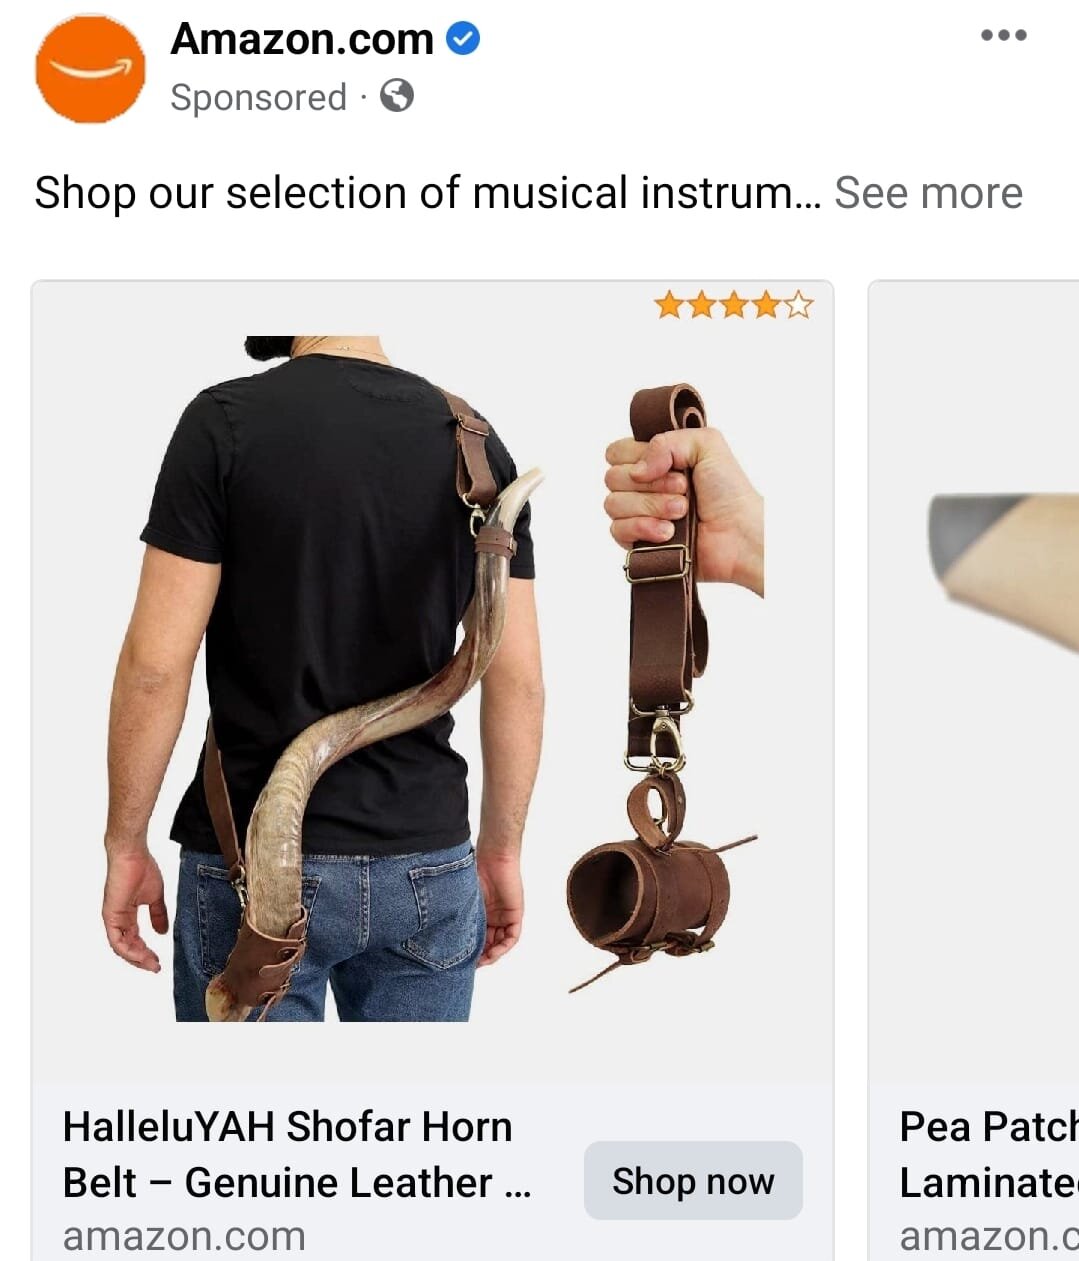 Amazon really is lazer targeting my interests with it's advertising these days